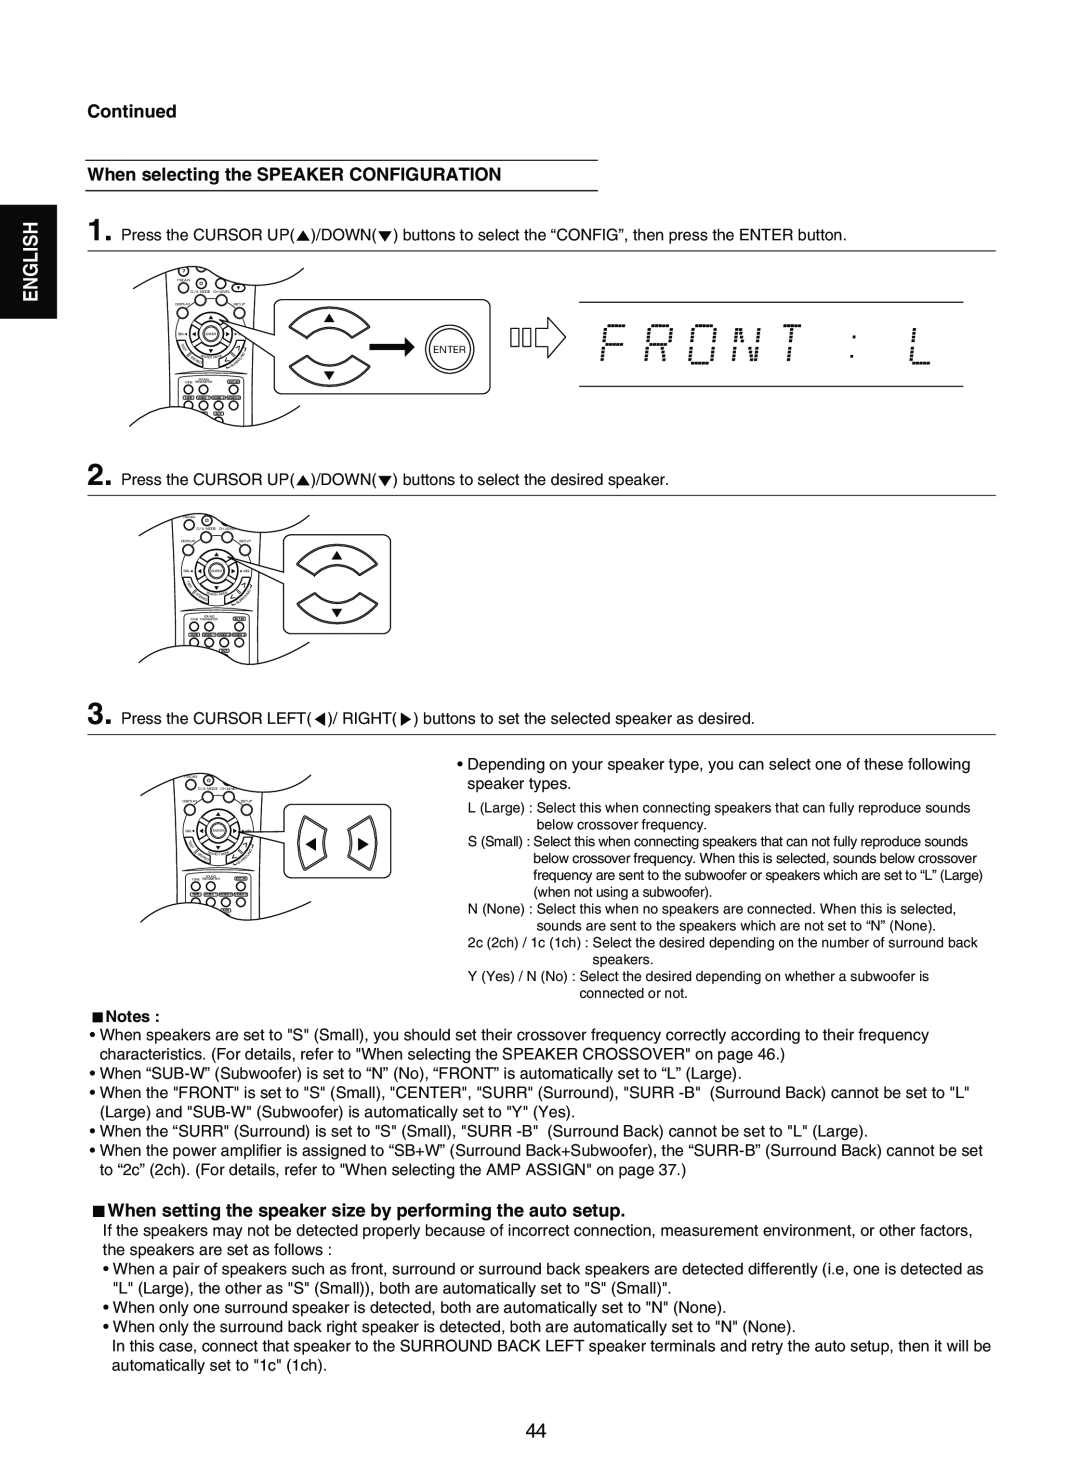 Sherwood RD-7502 manual When selecting the SPEAKER CONFIGURATION, English, Continued 